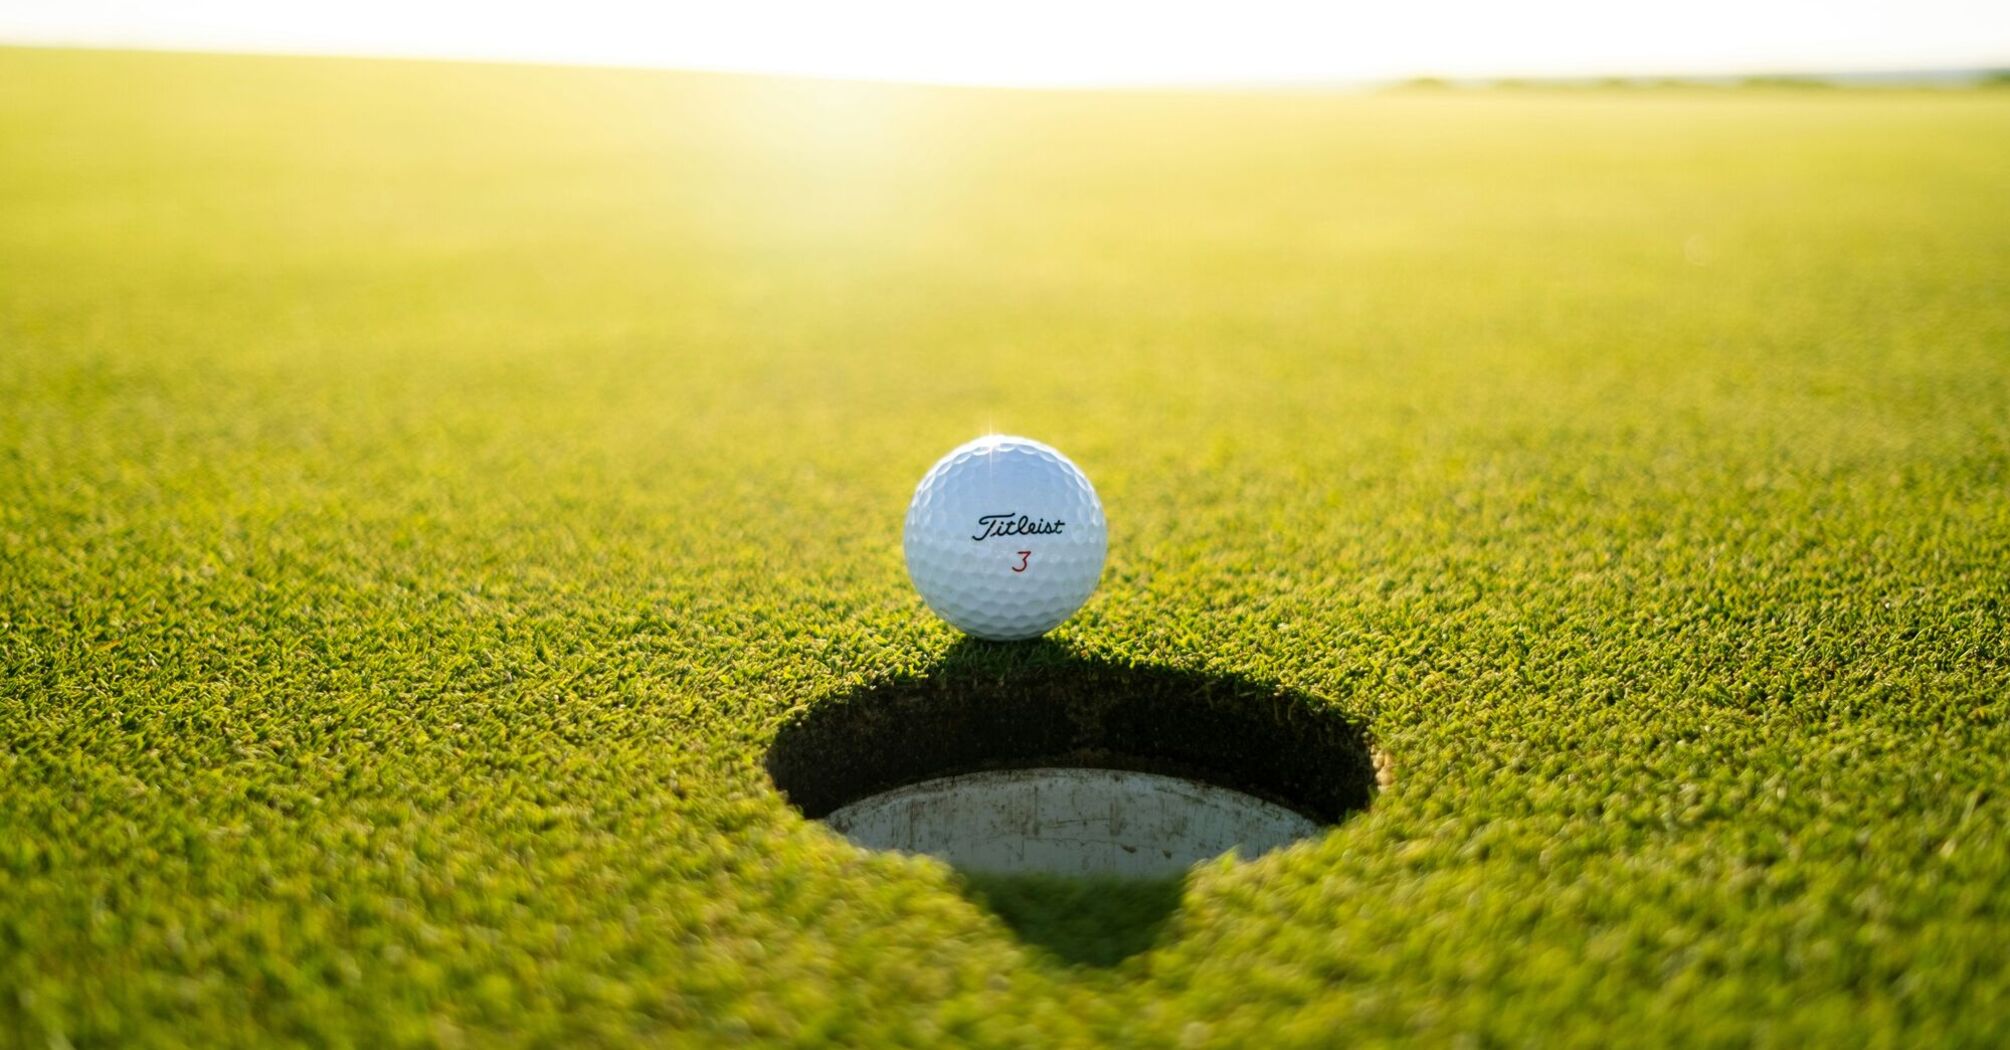 A golf ball on the edge of the hole on a vibrant green golf course, with sunlight casting a gentle glow across the horizon